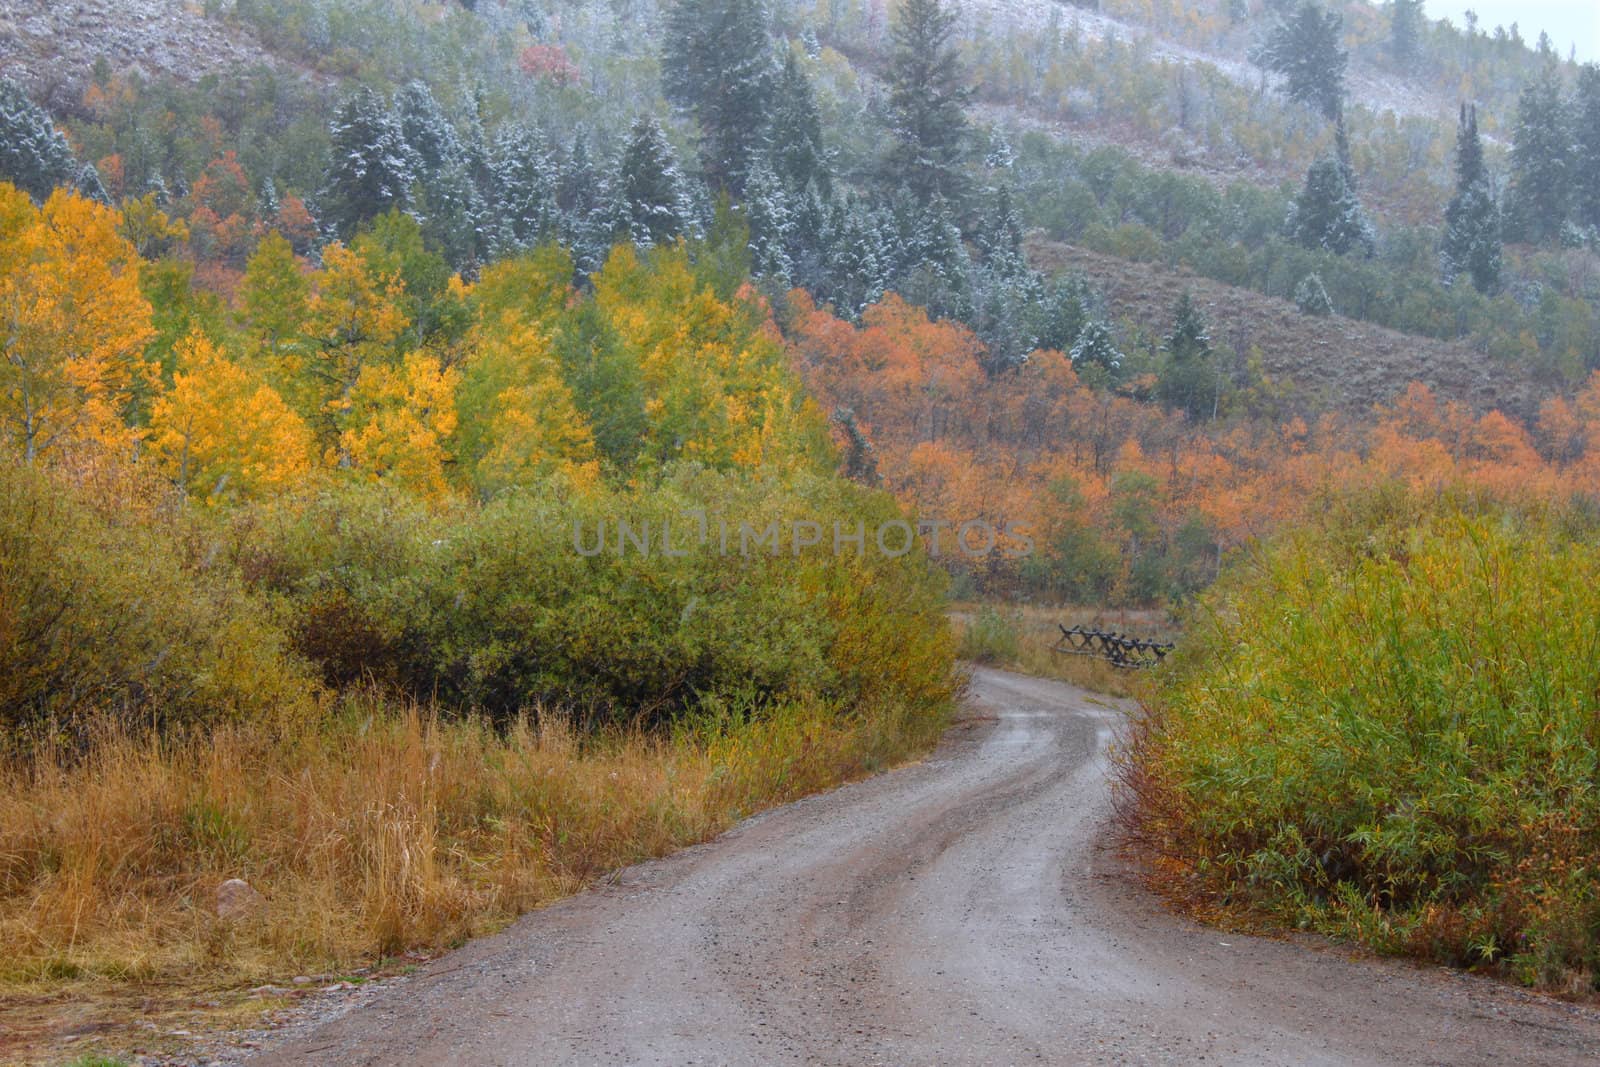 Dirt road winding through autumn scenery in the Cache National Forest of Utah.